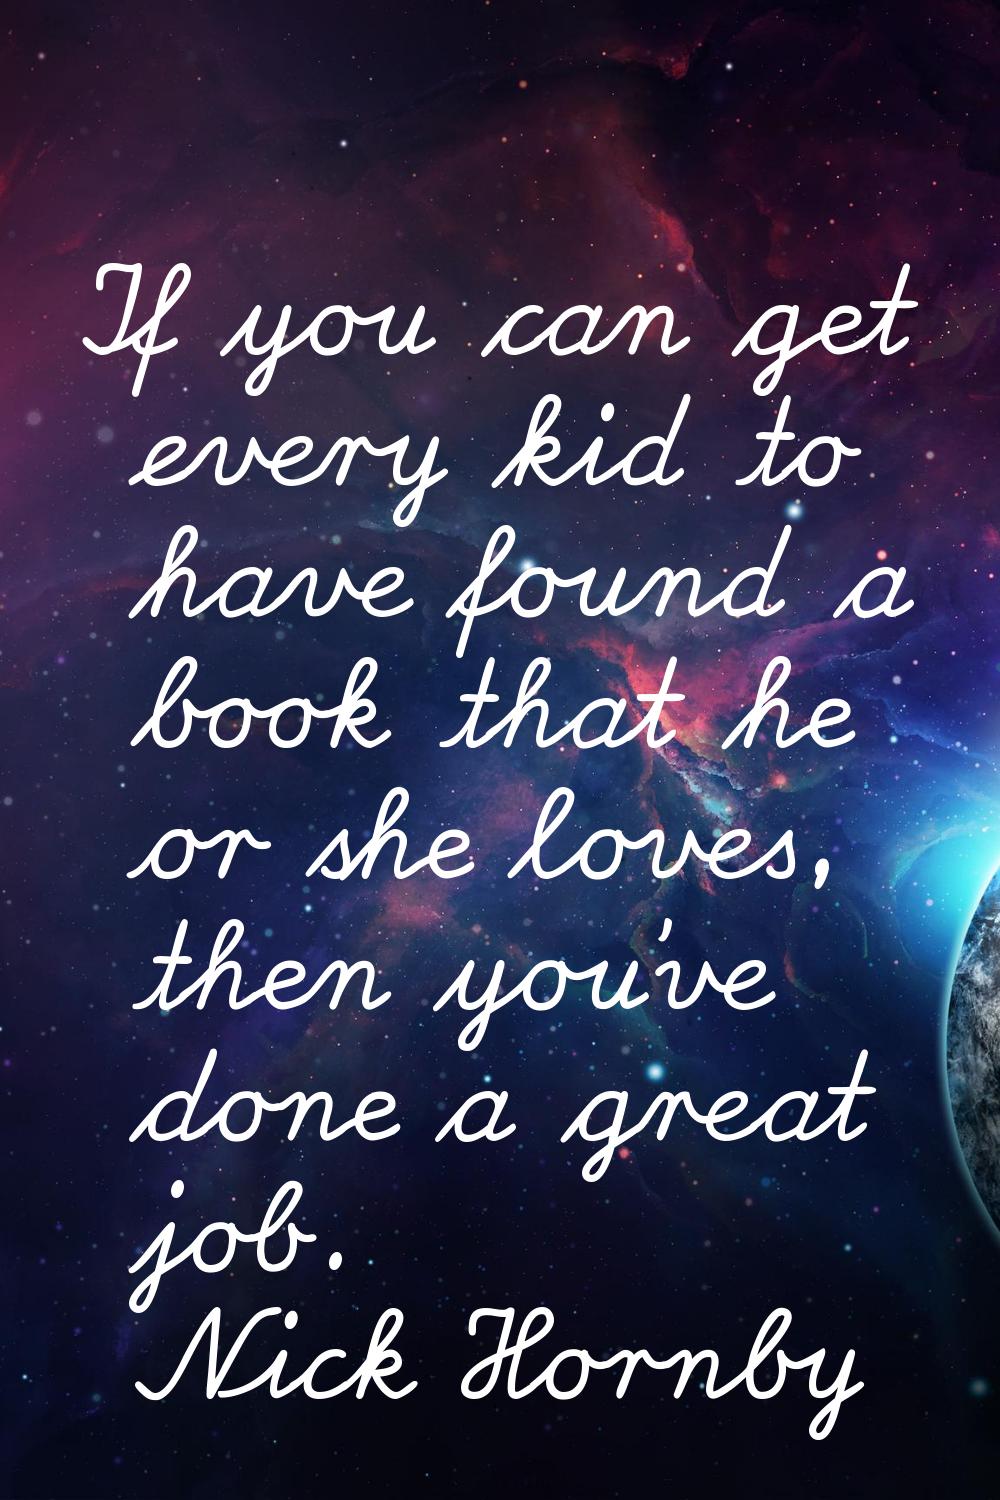 If you can get every kid to have found a book that he or she loves, then you've done a great job.